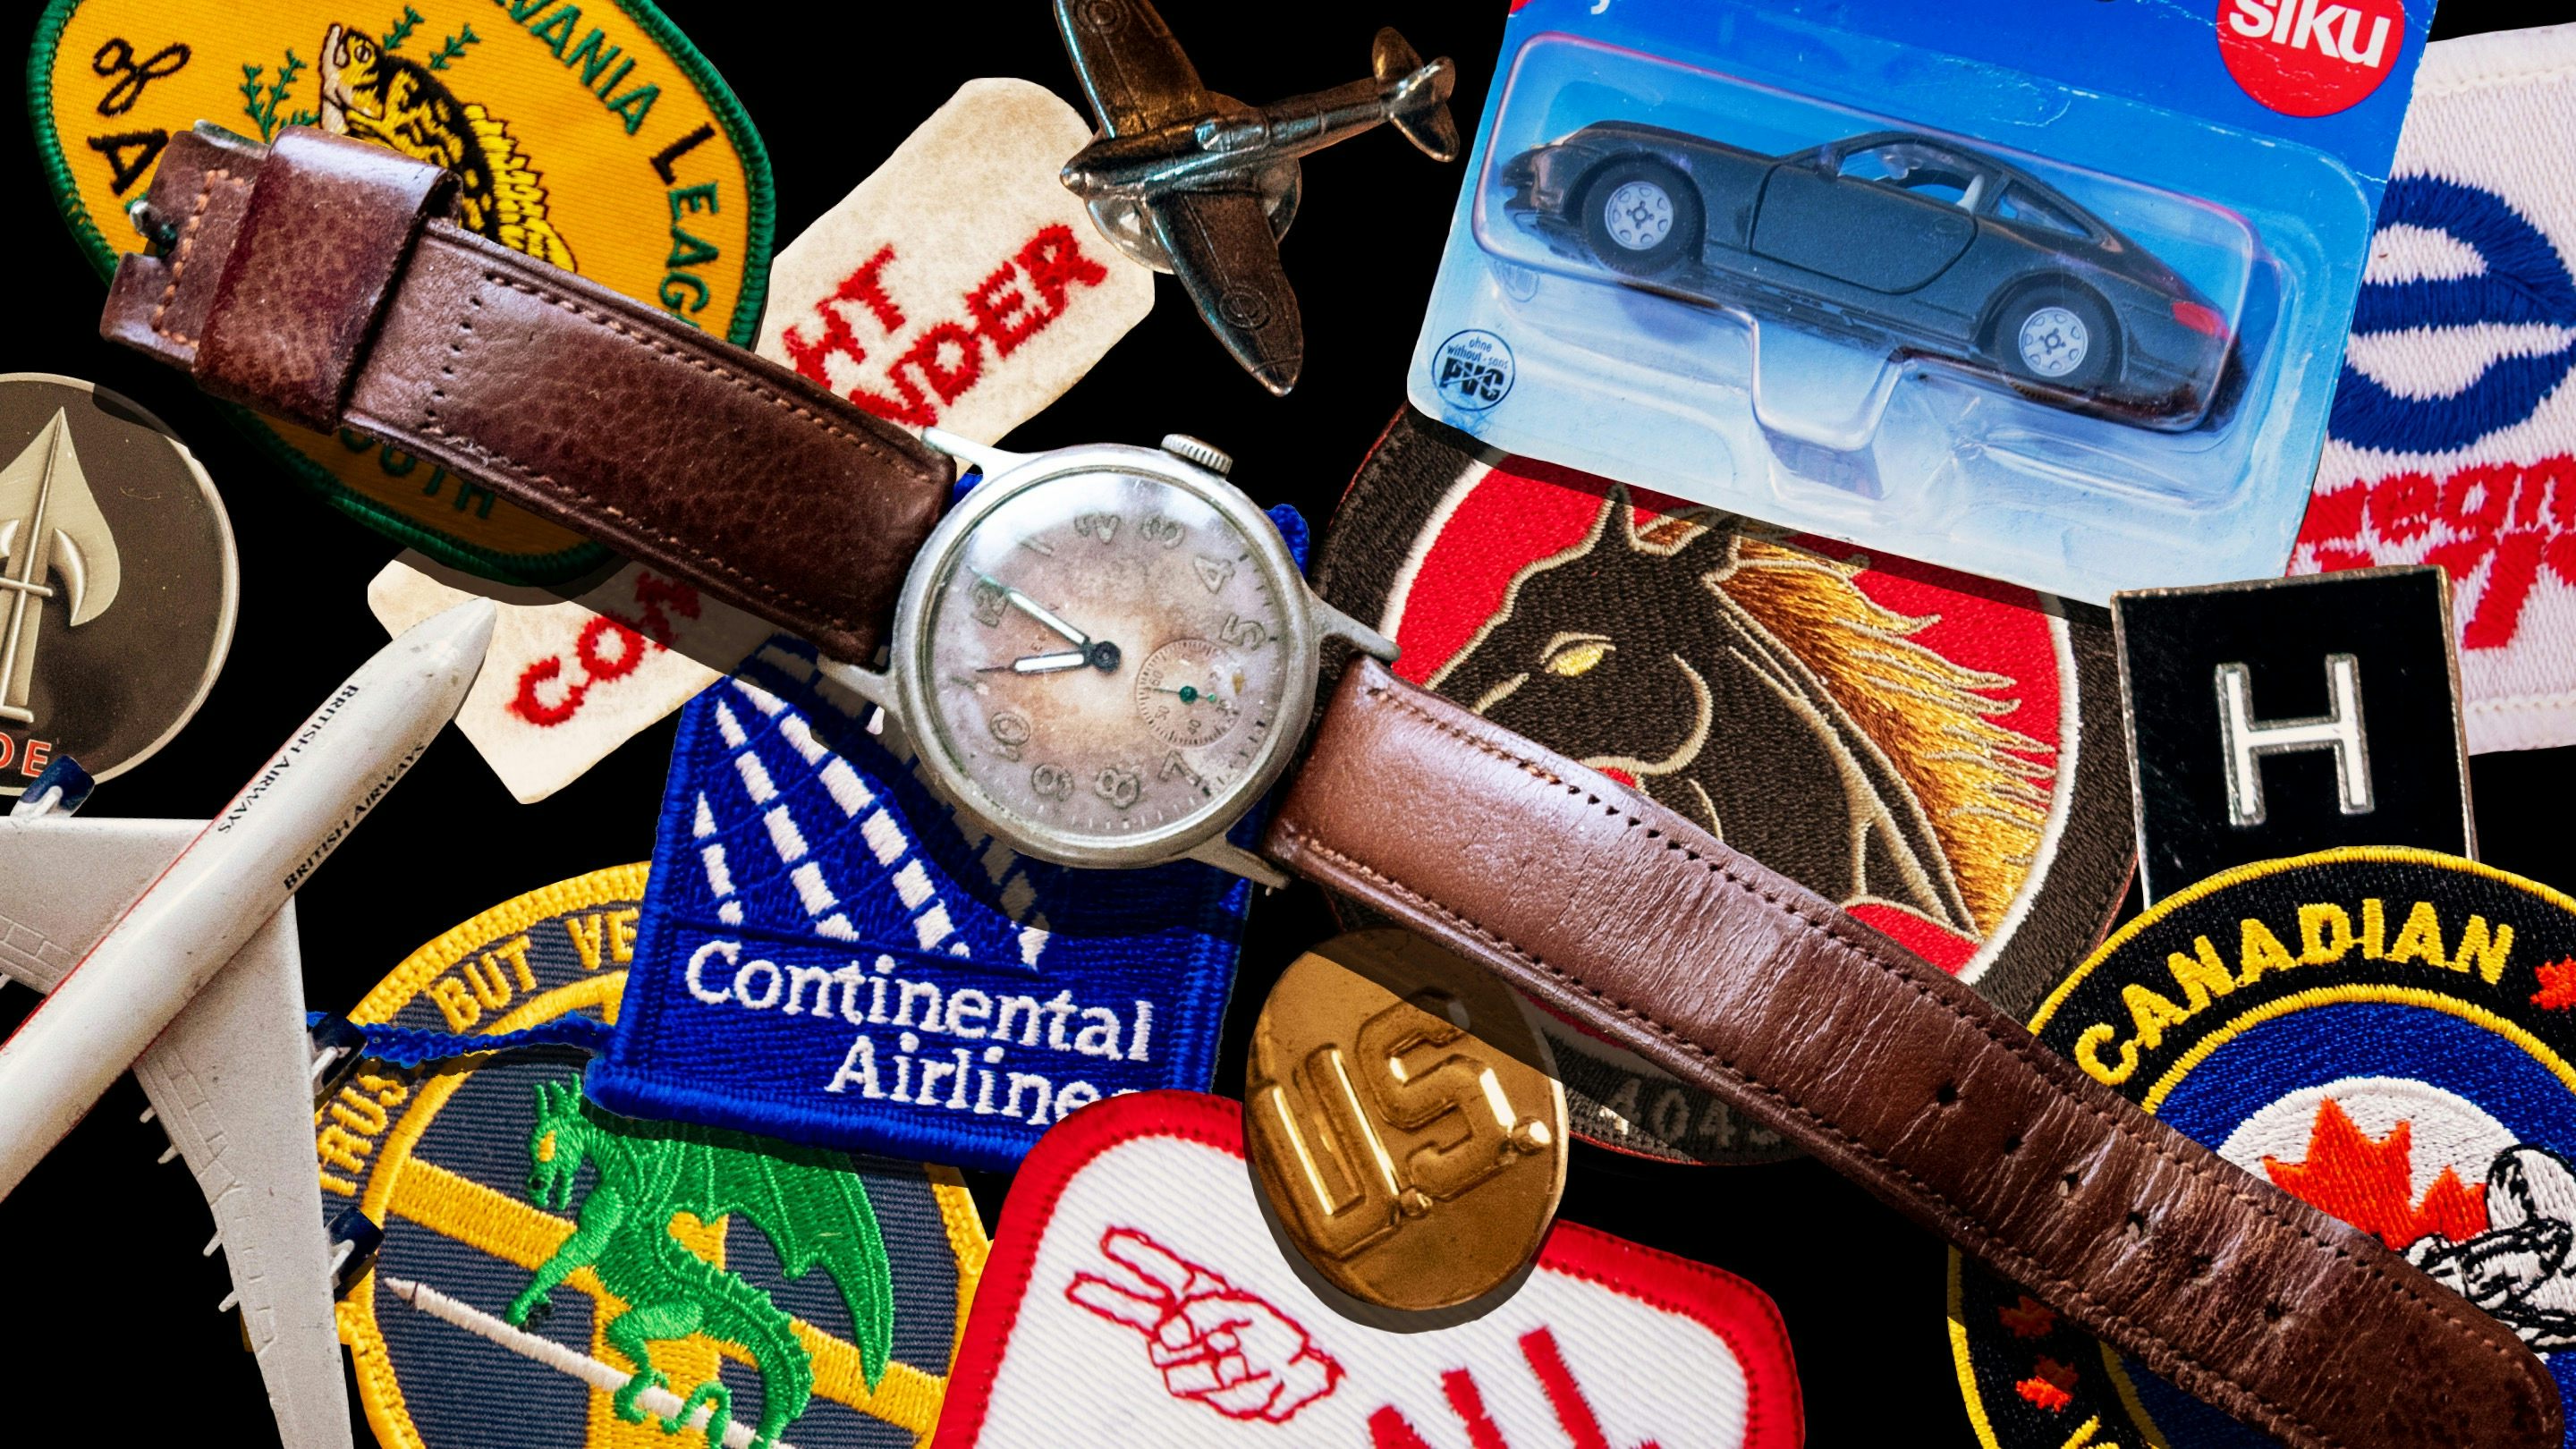 Collecting Beyond Watches